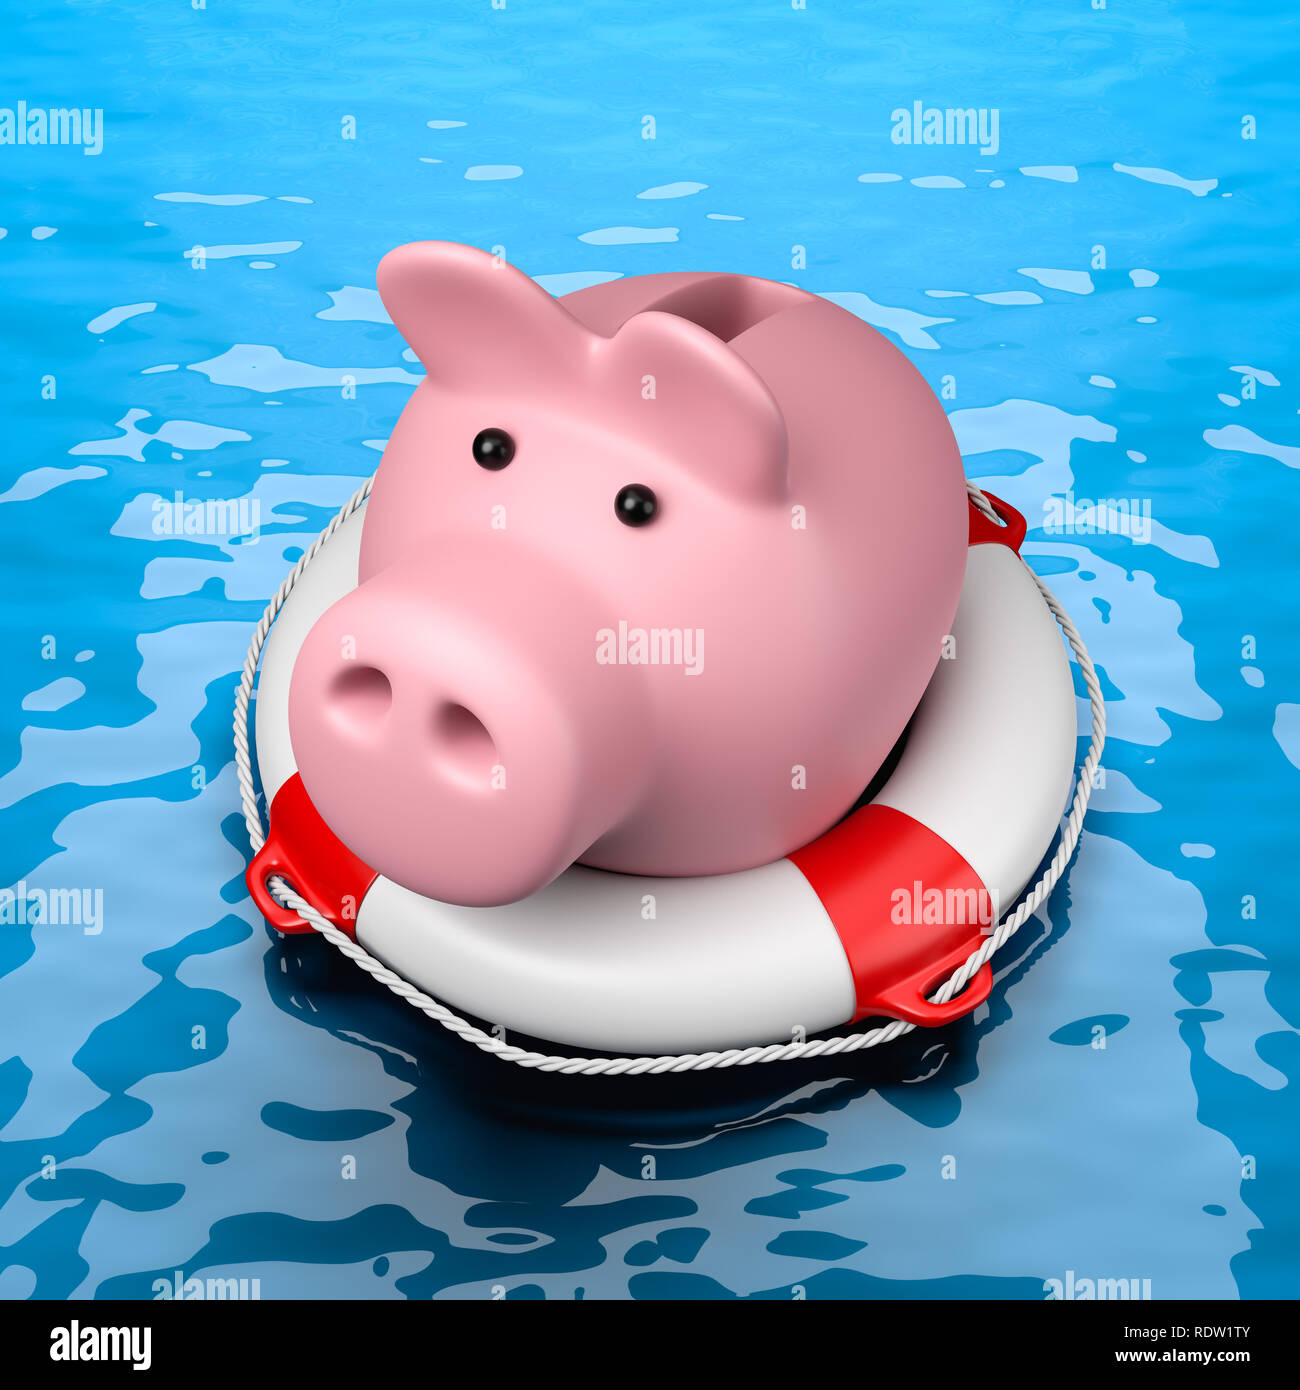 Pink Piggy Bank on a Lifebuoy in the Sea 3D Illustration Stock Photo